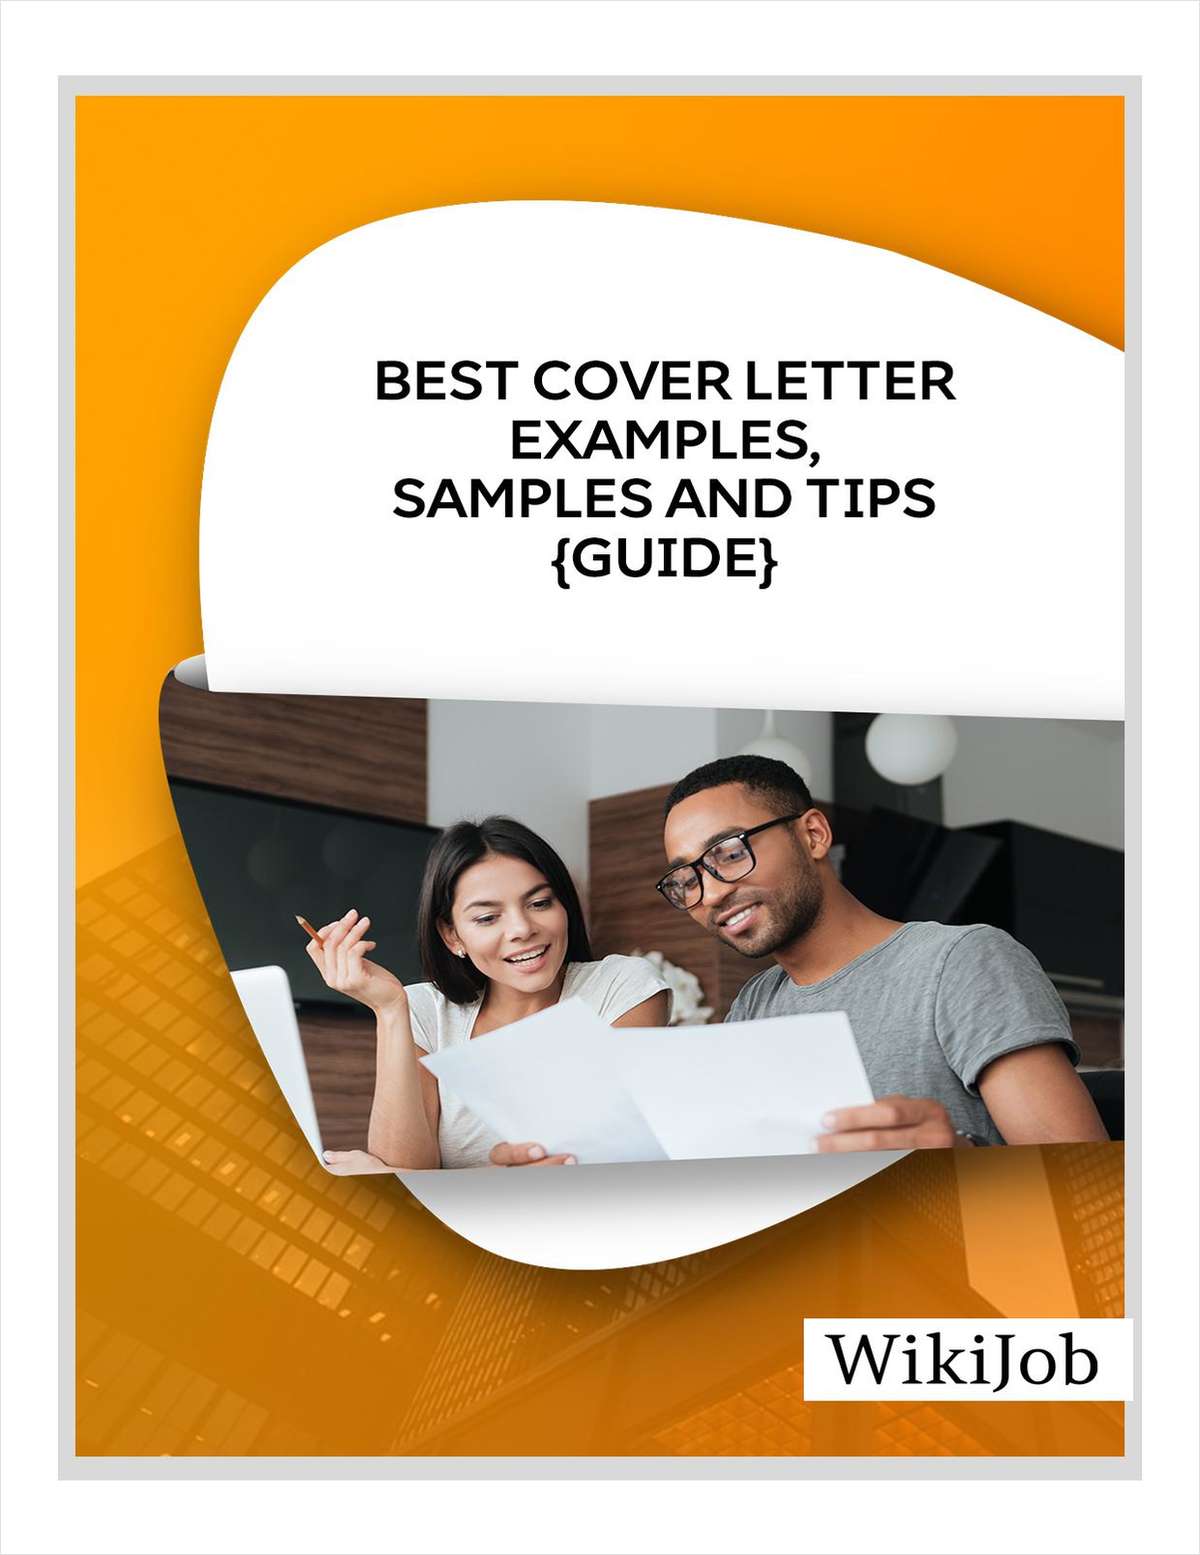 Best Cover Letter Examples, Samples and Tips